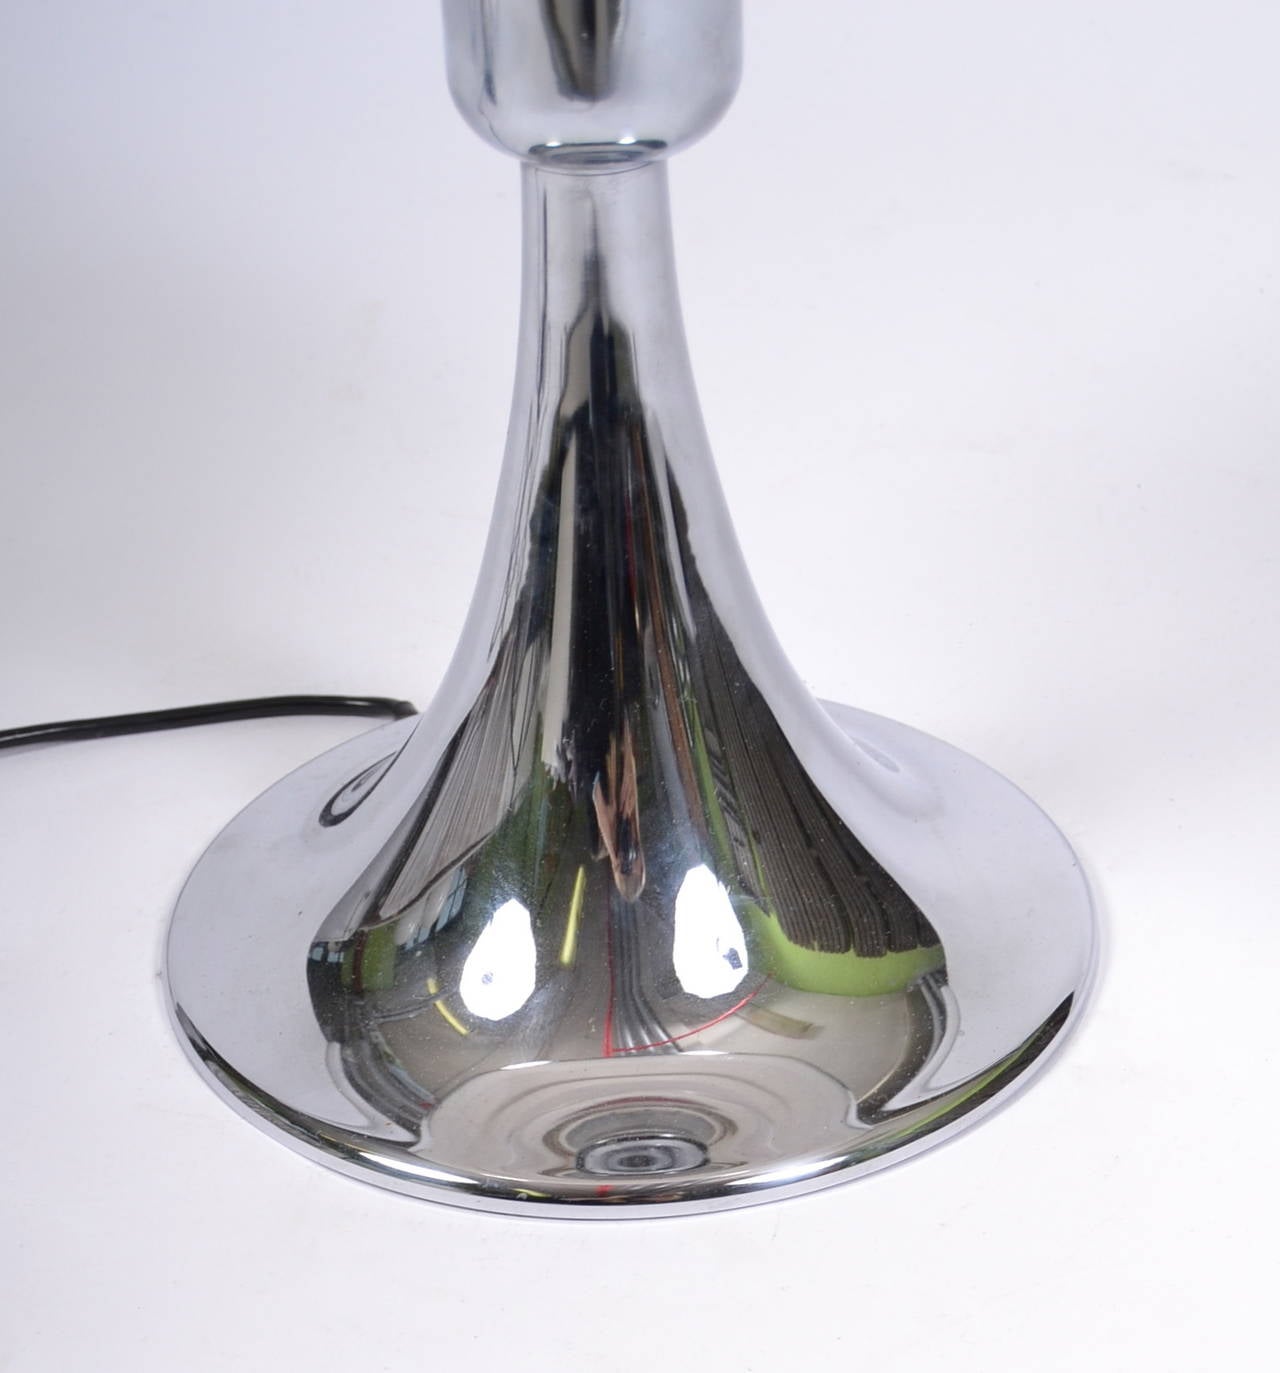 Verner Panton VP Europa Table Lamp - Very Rare - top condition

Louis Poulsen label still under base

only produced for a short period

Mouth-blown glass shades. The shade is partly clear glass, partly lacquered white with a slightly domed